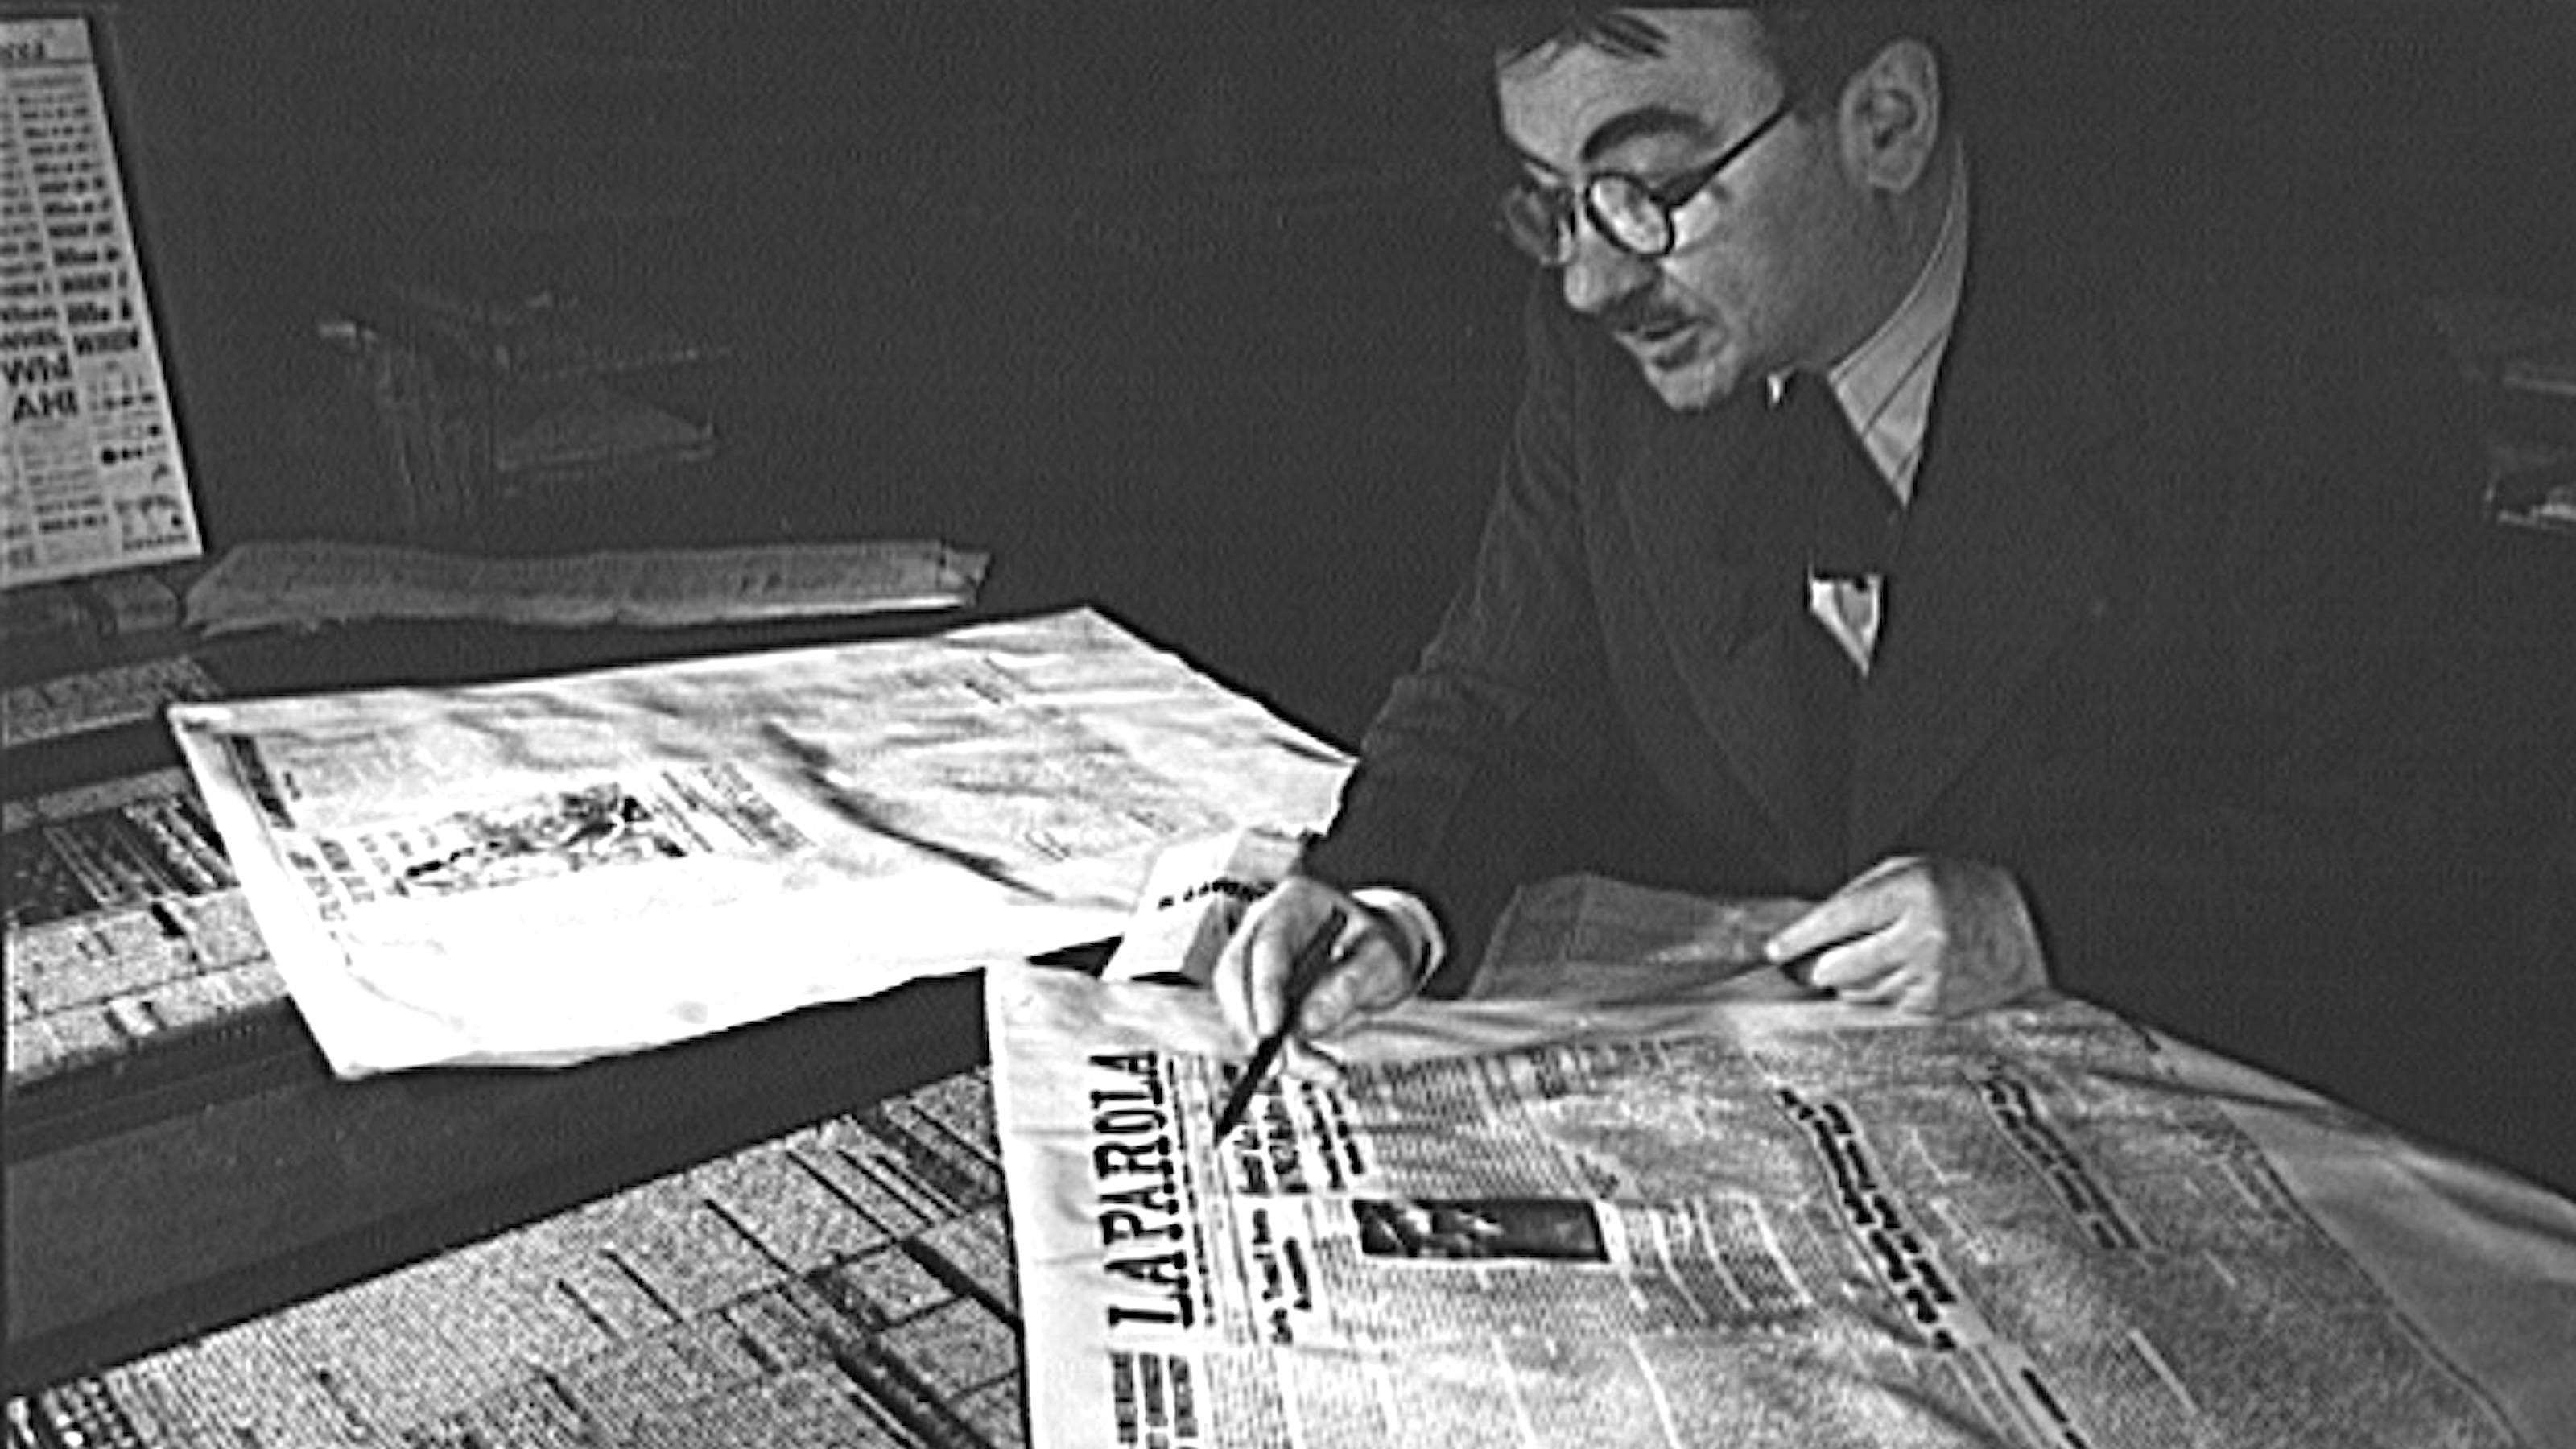 A man, engaged in the act of reading, is seated at a table with a newspaper in front of him.